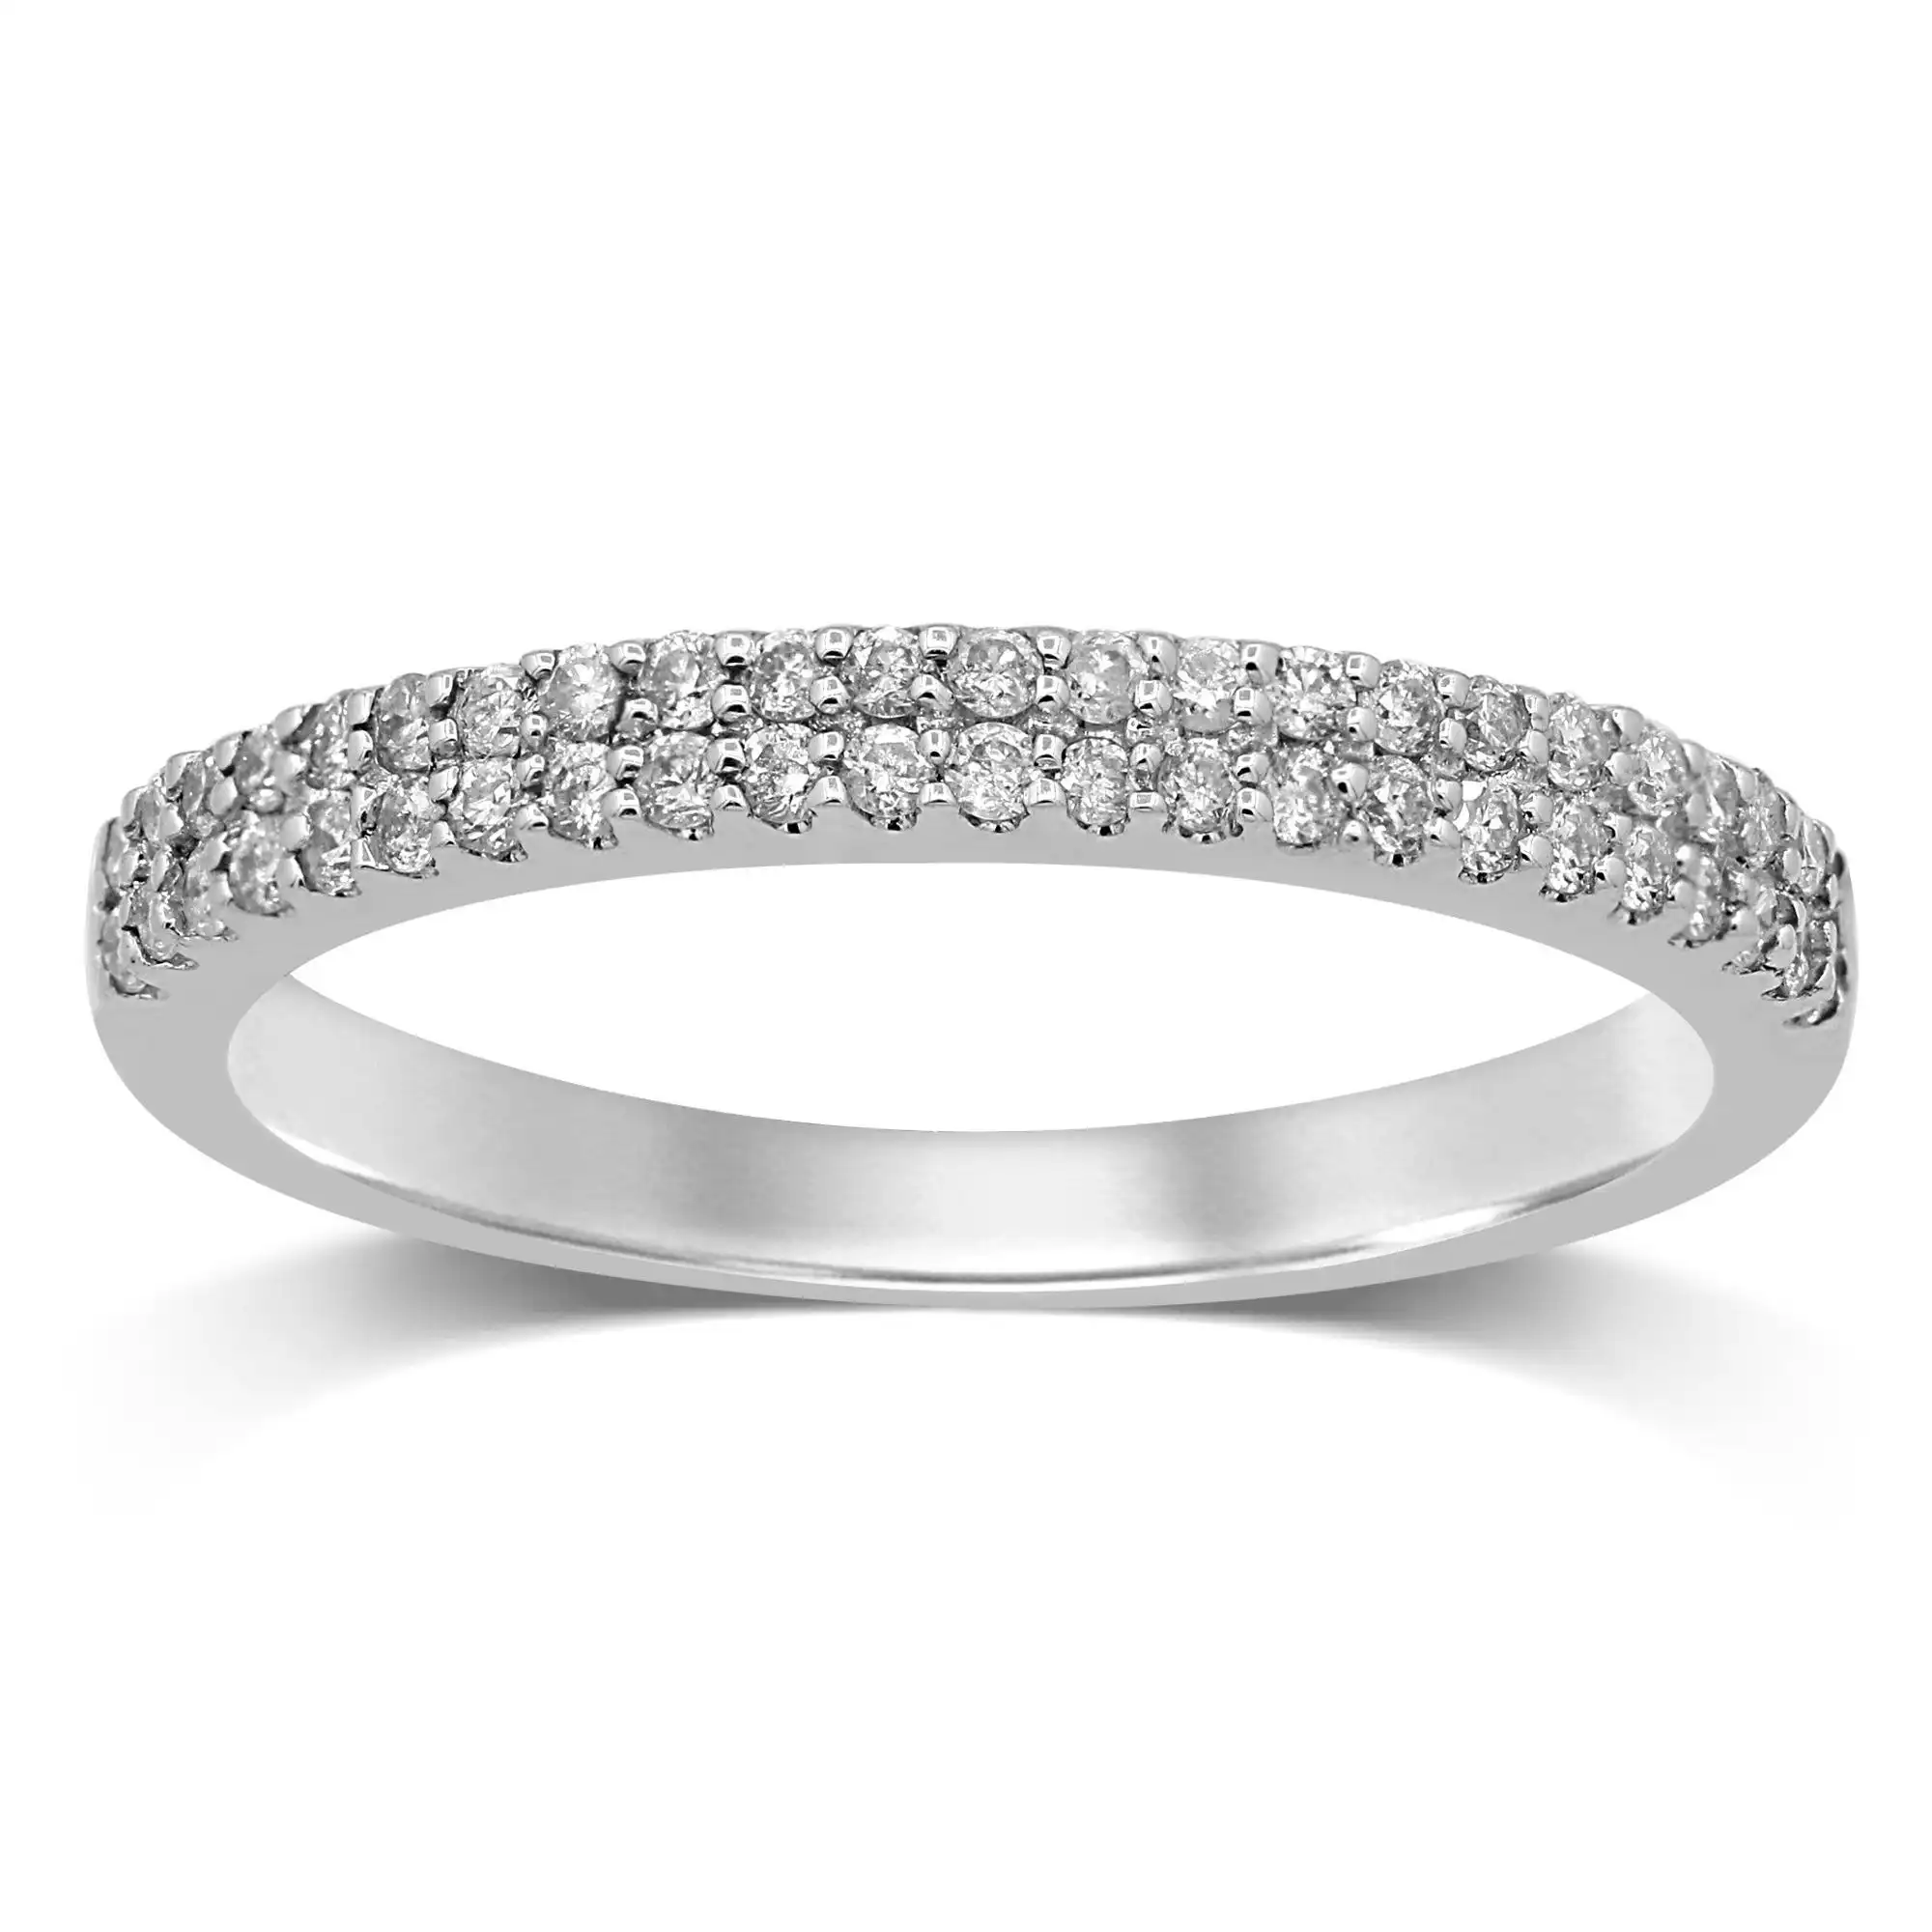 Double Row Ring with 1/4ct of Diamonds in 9ct White Gold